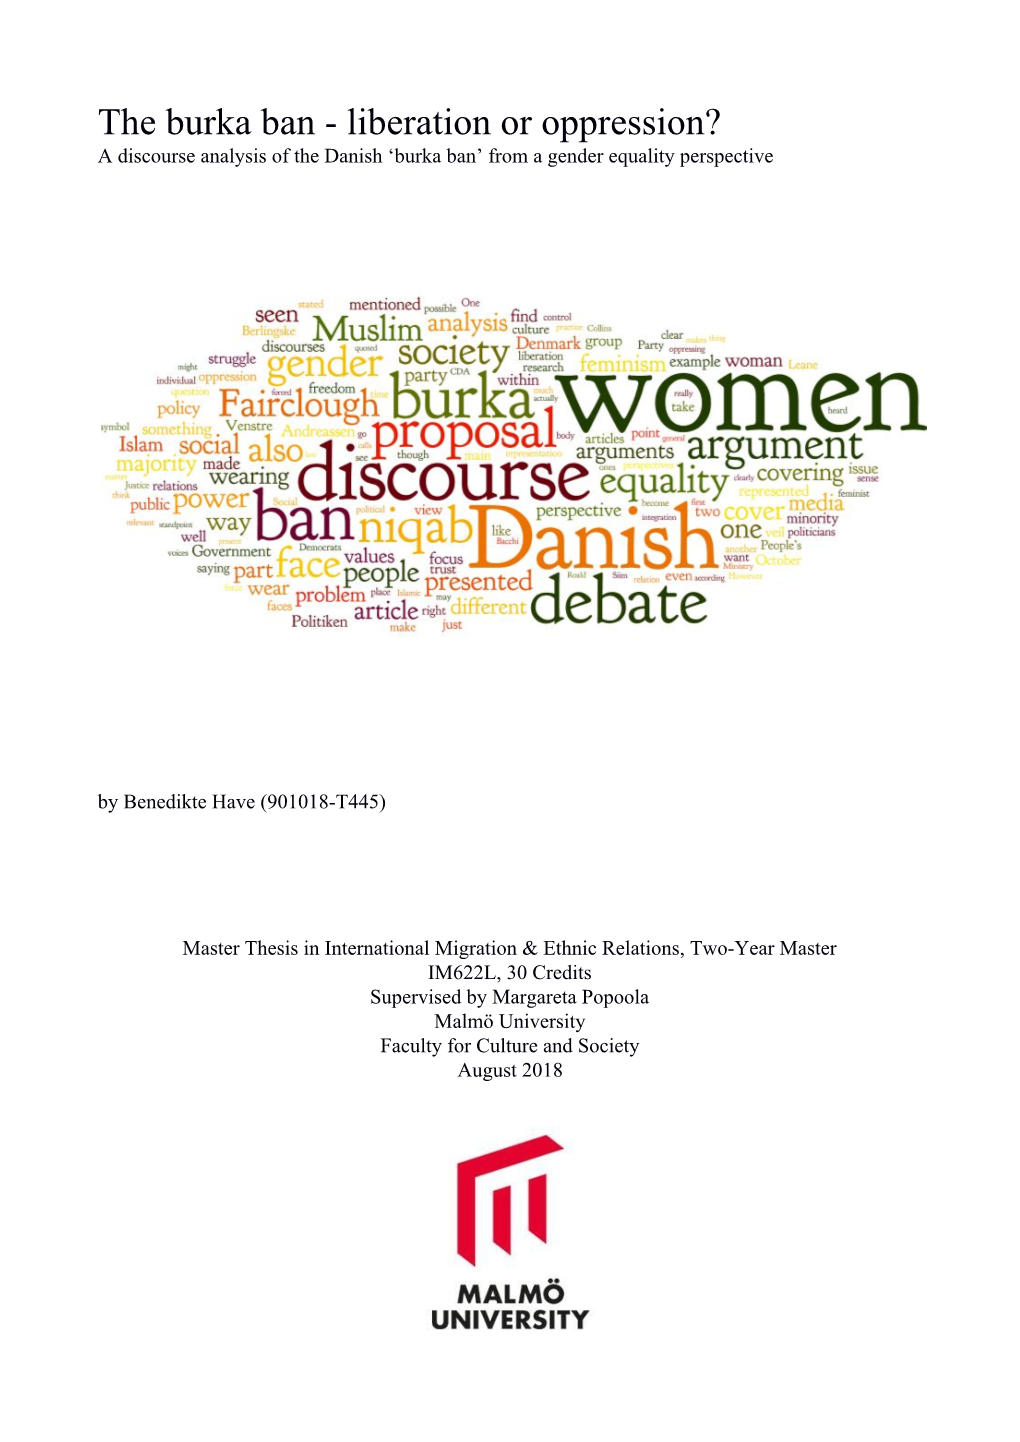 The Burka Ban - Liberation Or Oppression? a Discourse Analysis of the Danish ‘Burka Ban’ from a Gender Equality Perspective